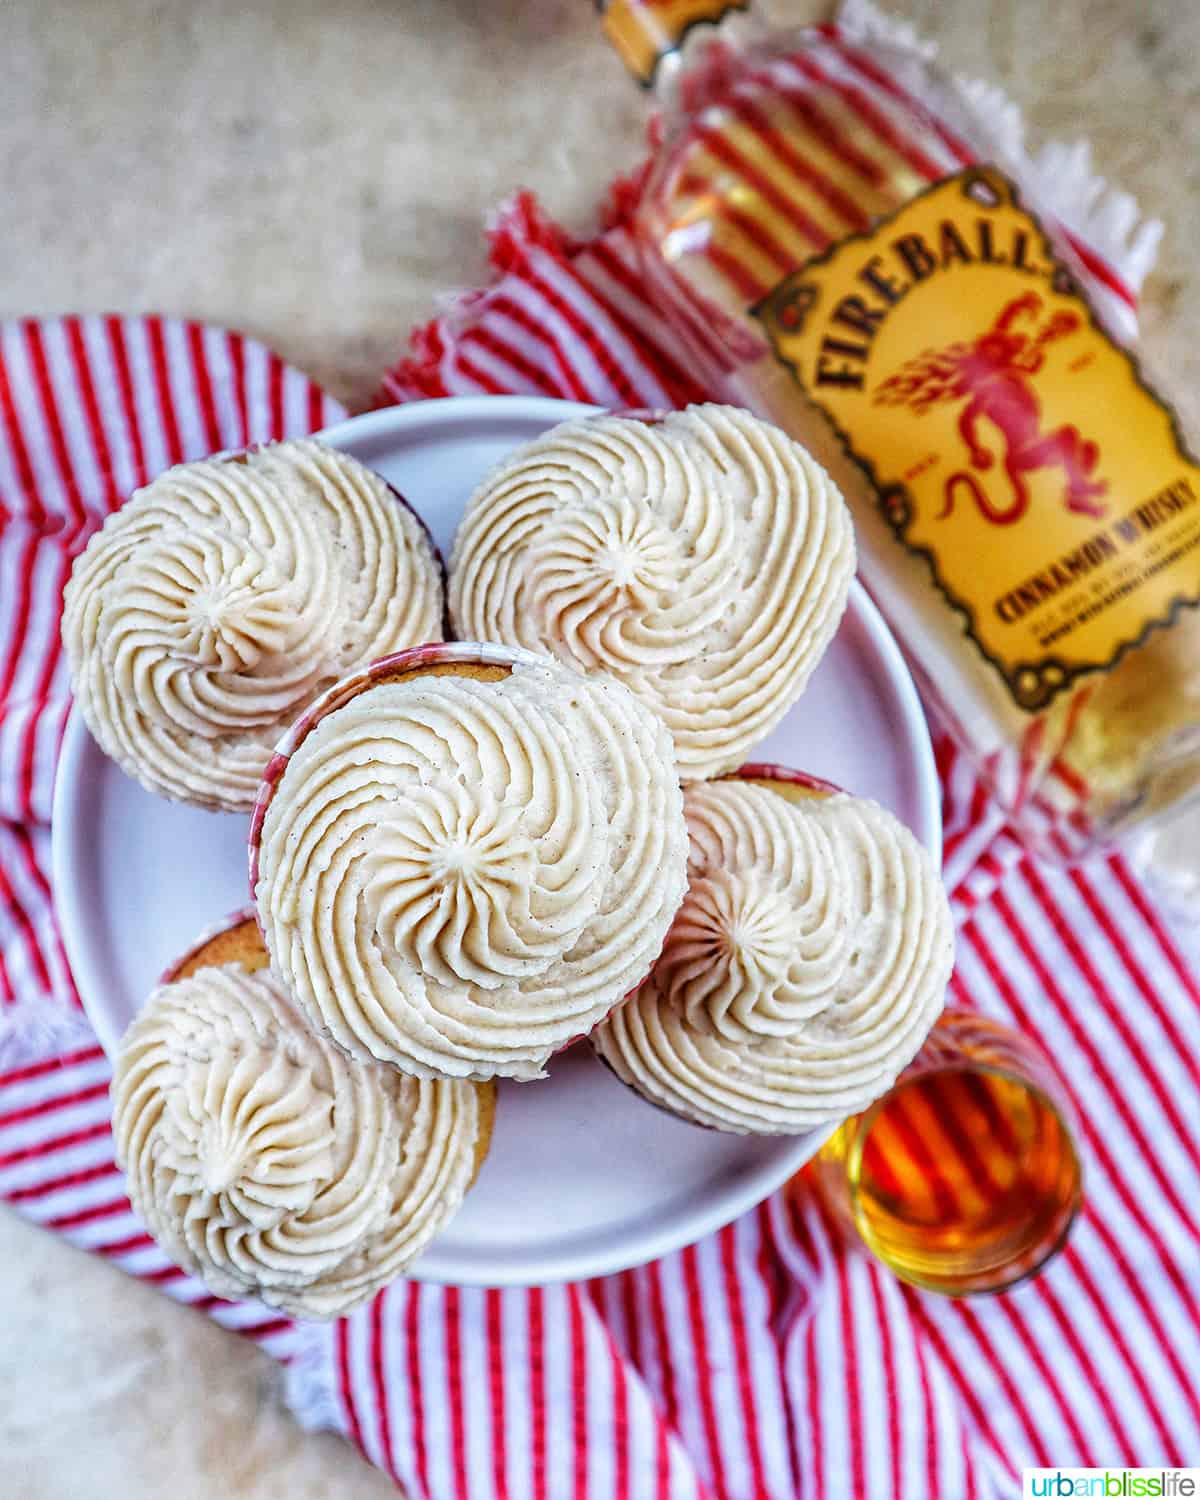 overhead photo of five cupcakes on a cake stand next to bottle of Fireball whiskey on a red and white napkin.